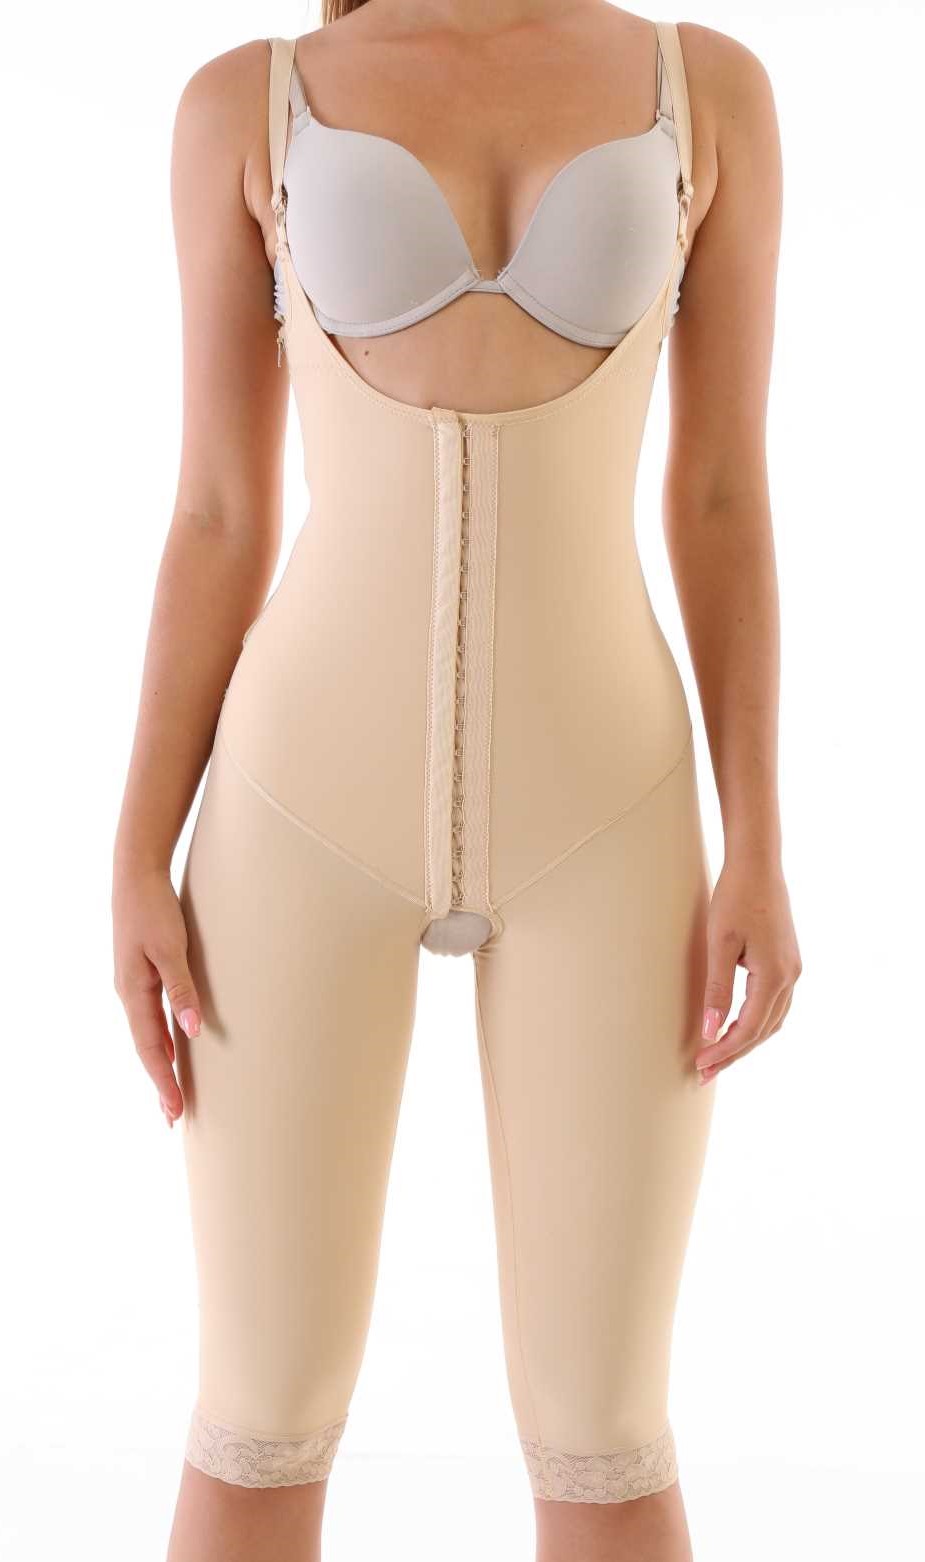 ABDOMINAL POST-SURGICAL COMPRESSION GARMENT - EXTENDED BACK WITH ZIP (BELOW THE KNEE)